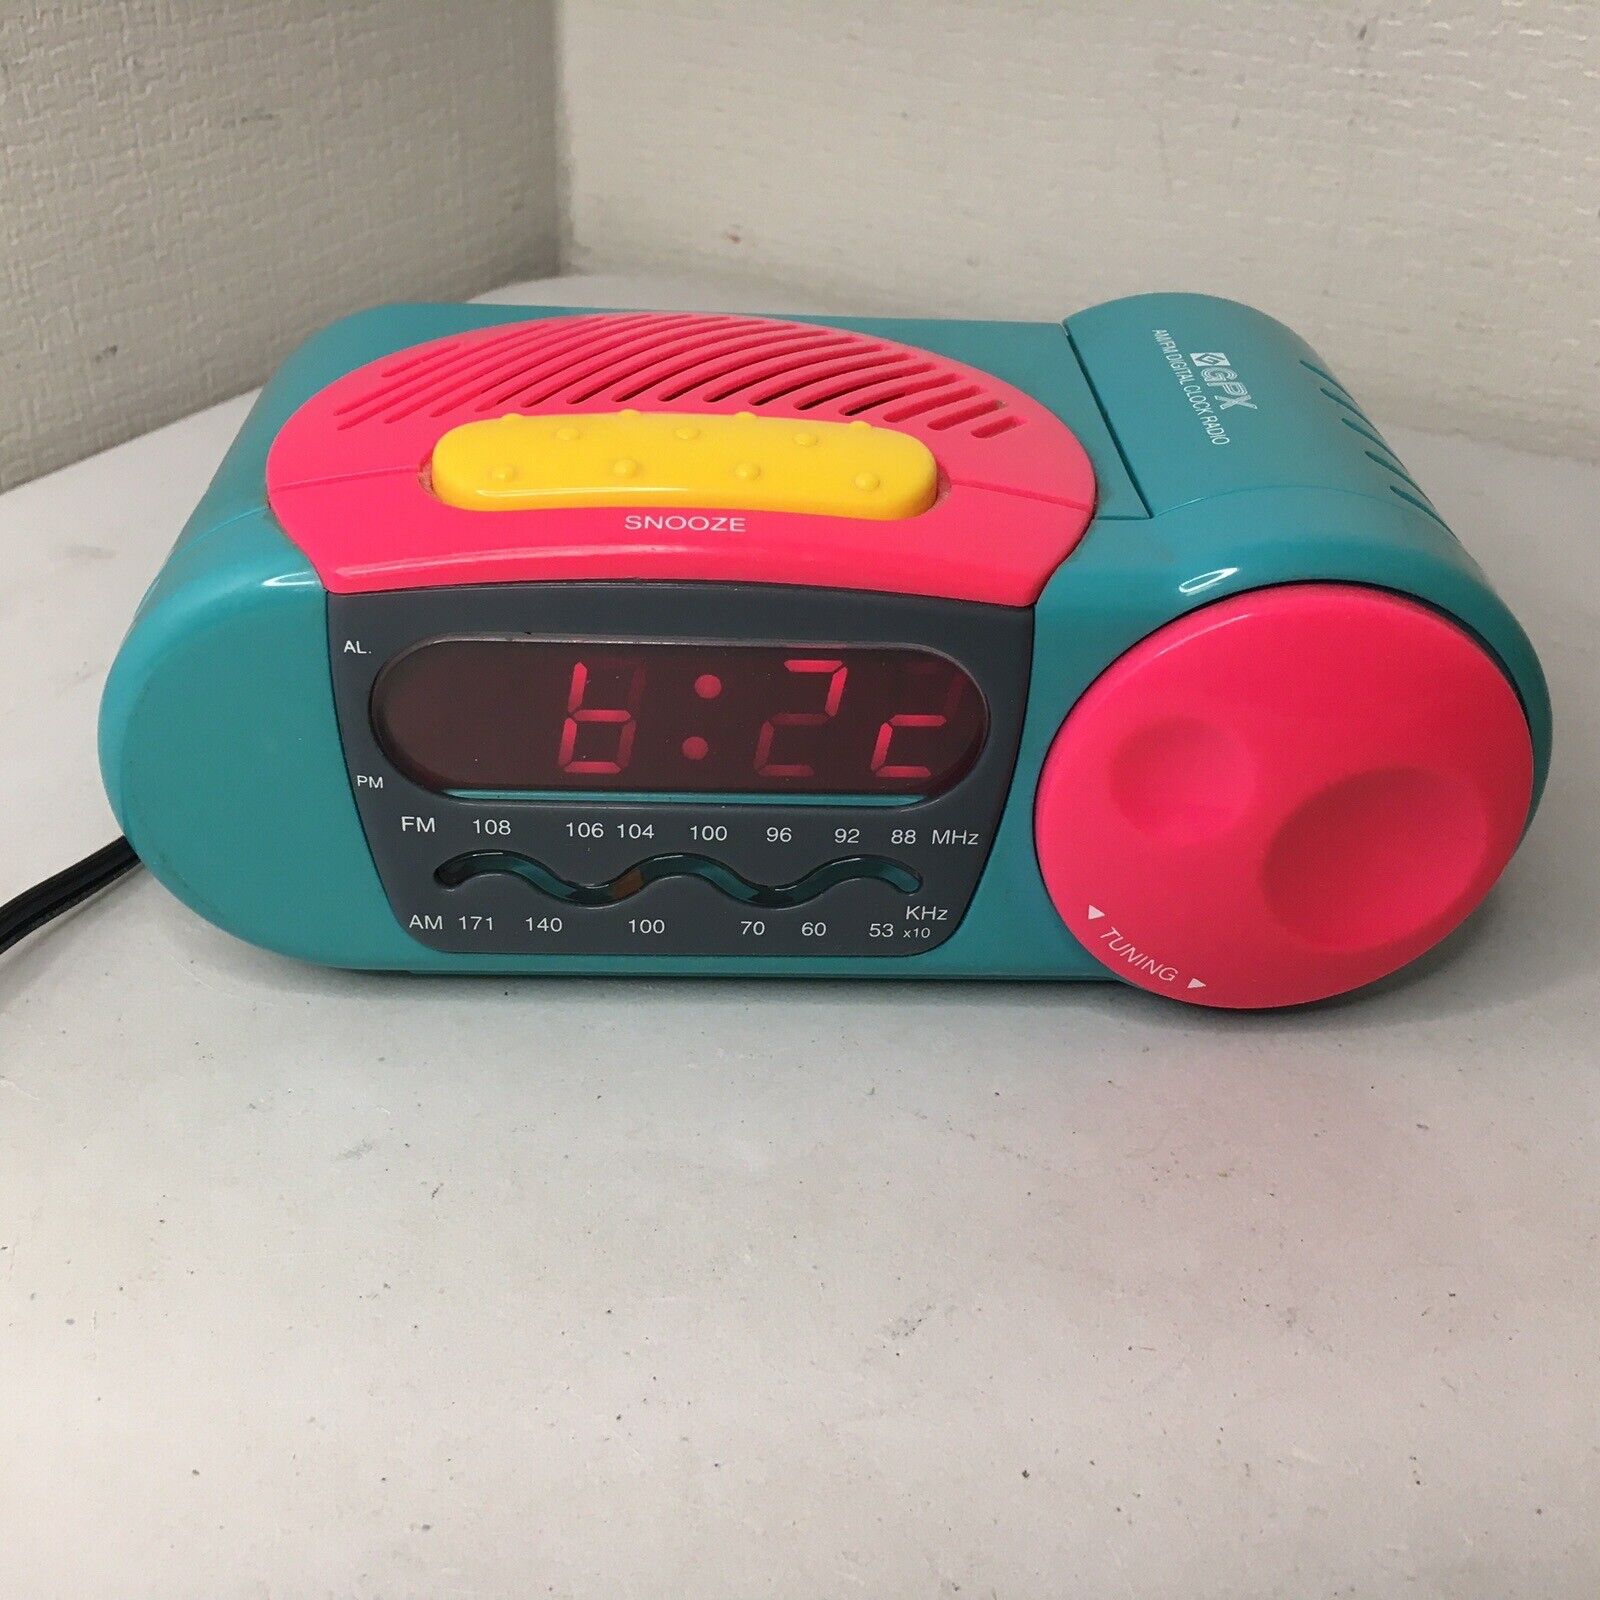 GPX Digital Alarm Clock AM/FM Radio Vintage 90s D400cal Pink Teal Yellow Tested